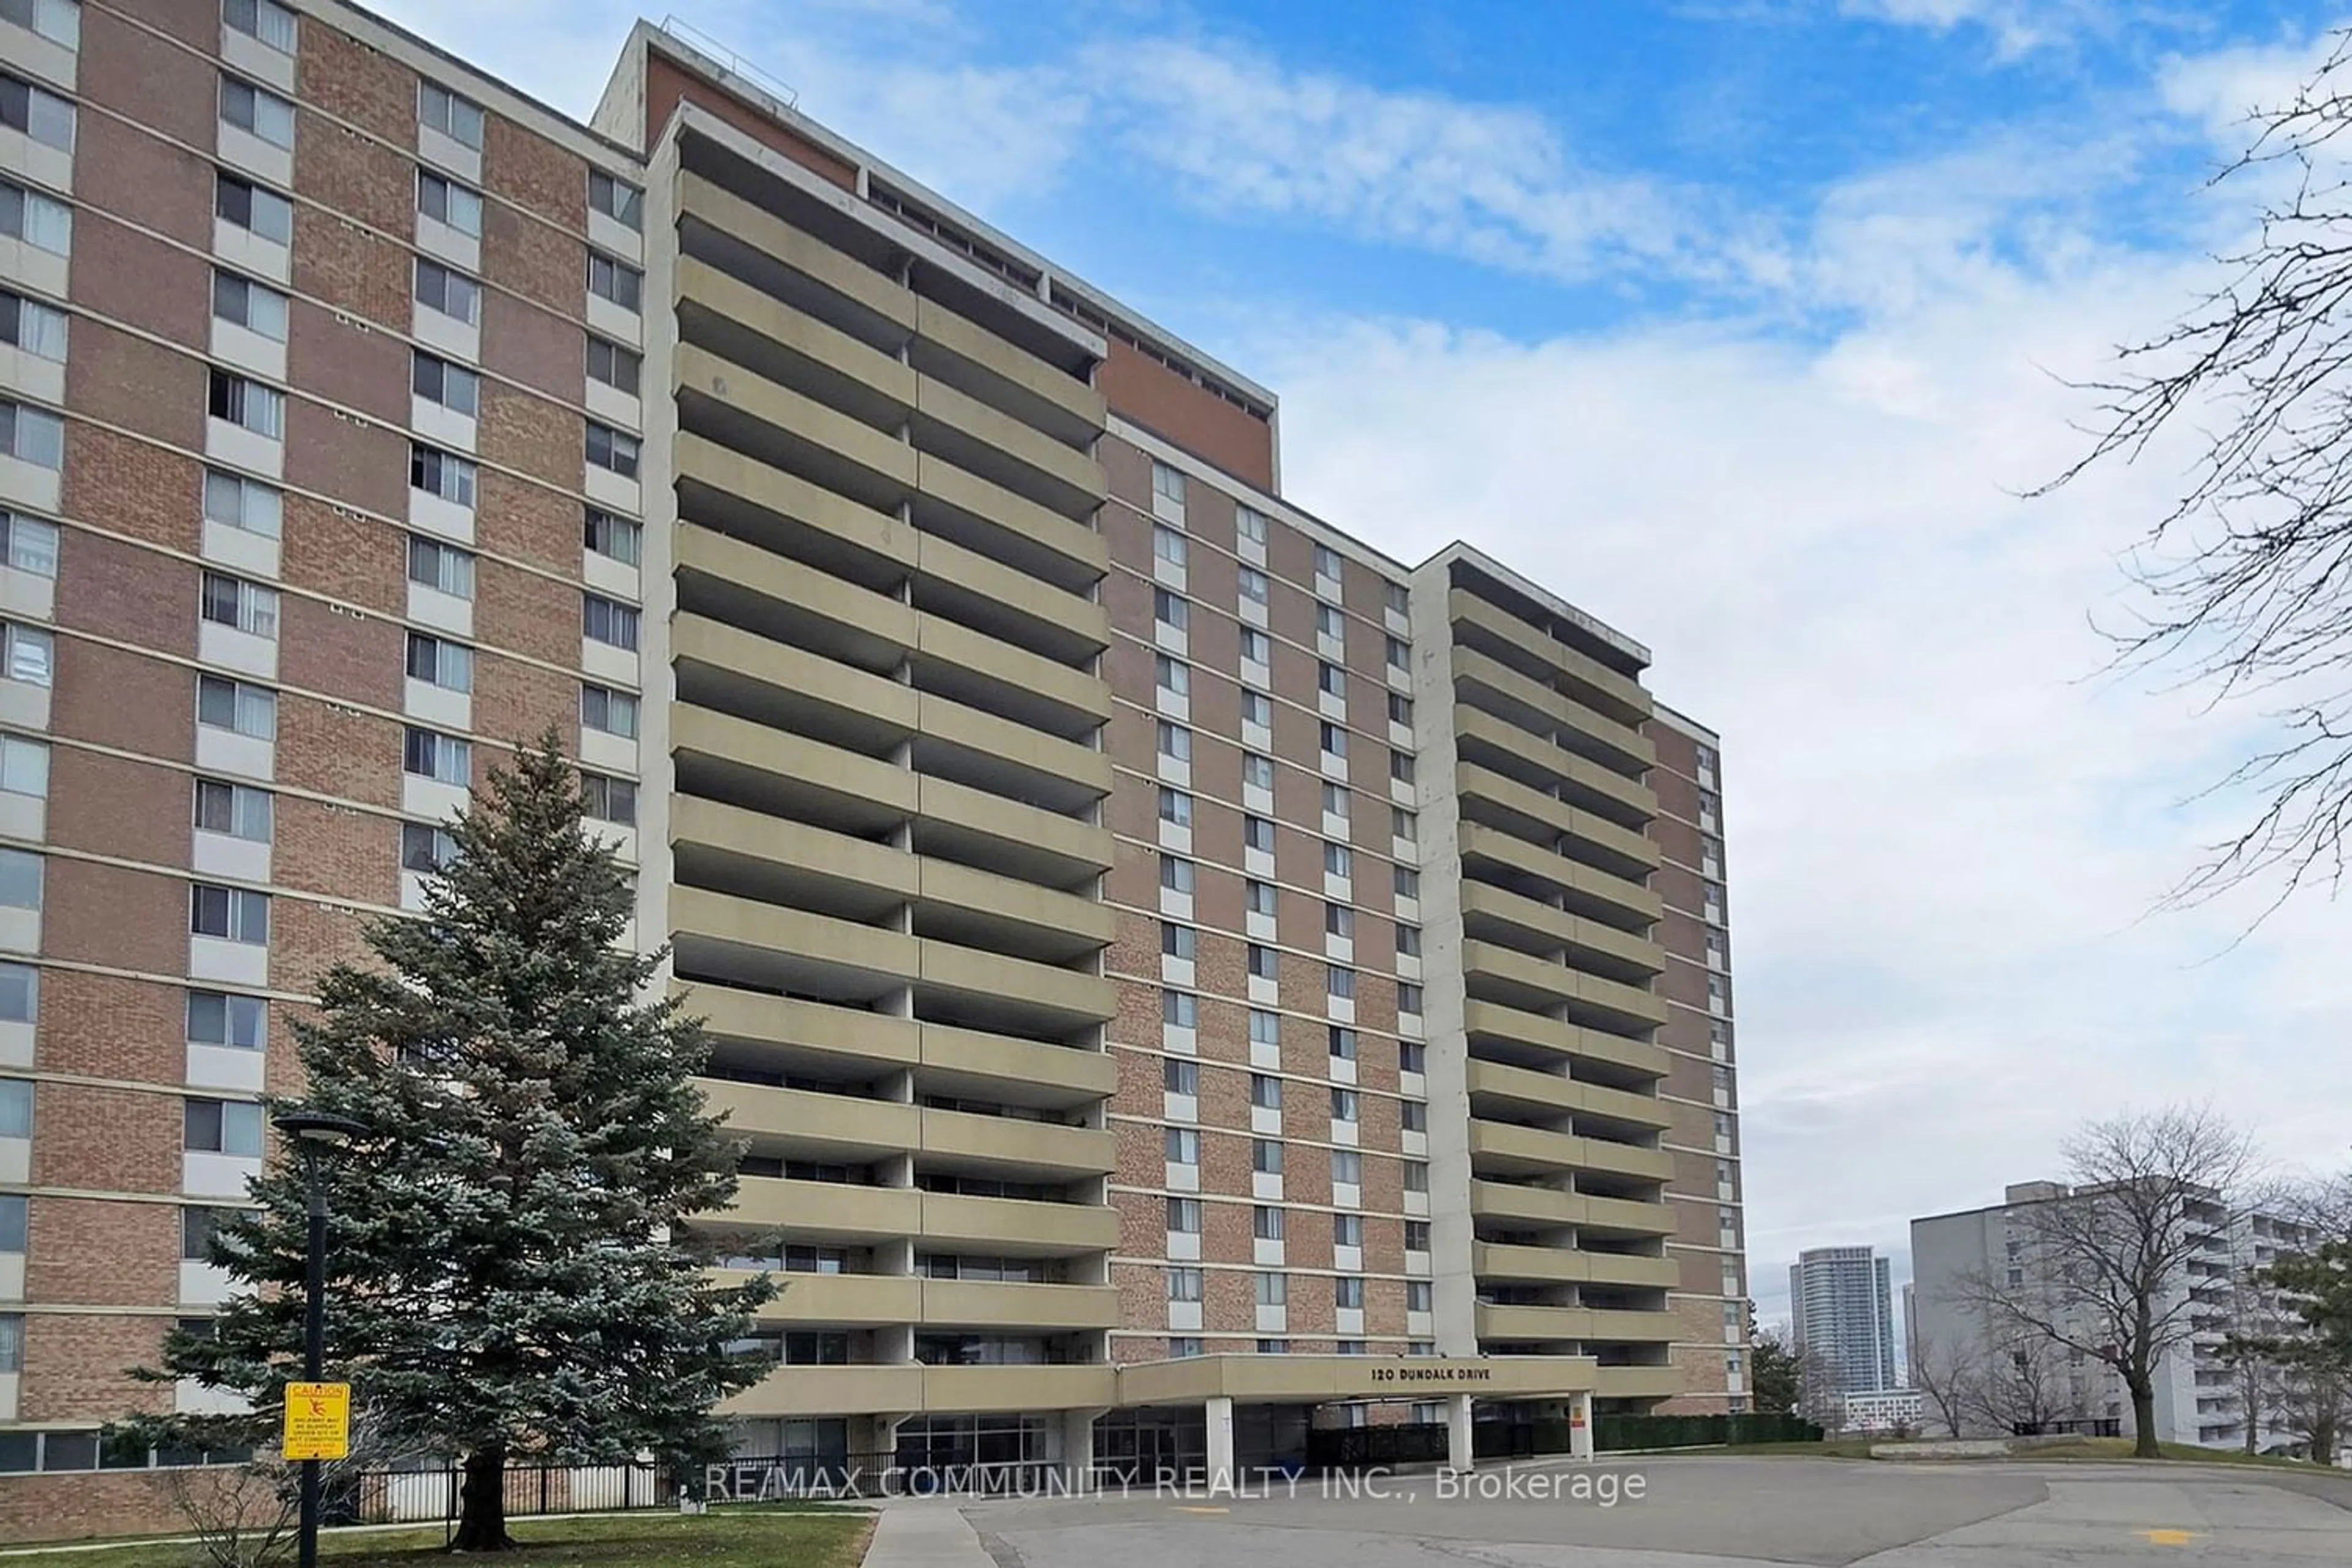 A pic from exterior of the house or condo for 120 Dundalk Dr #1104, Toronto Ontario M1P 4V9